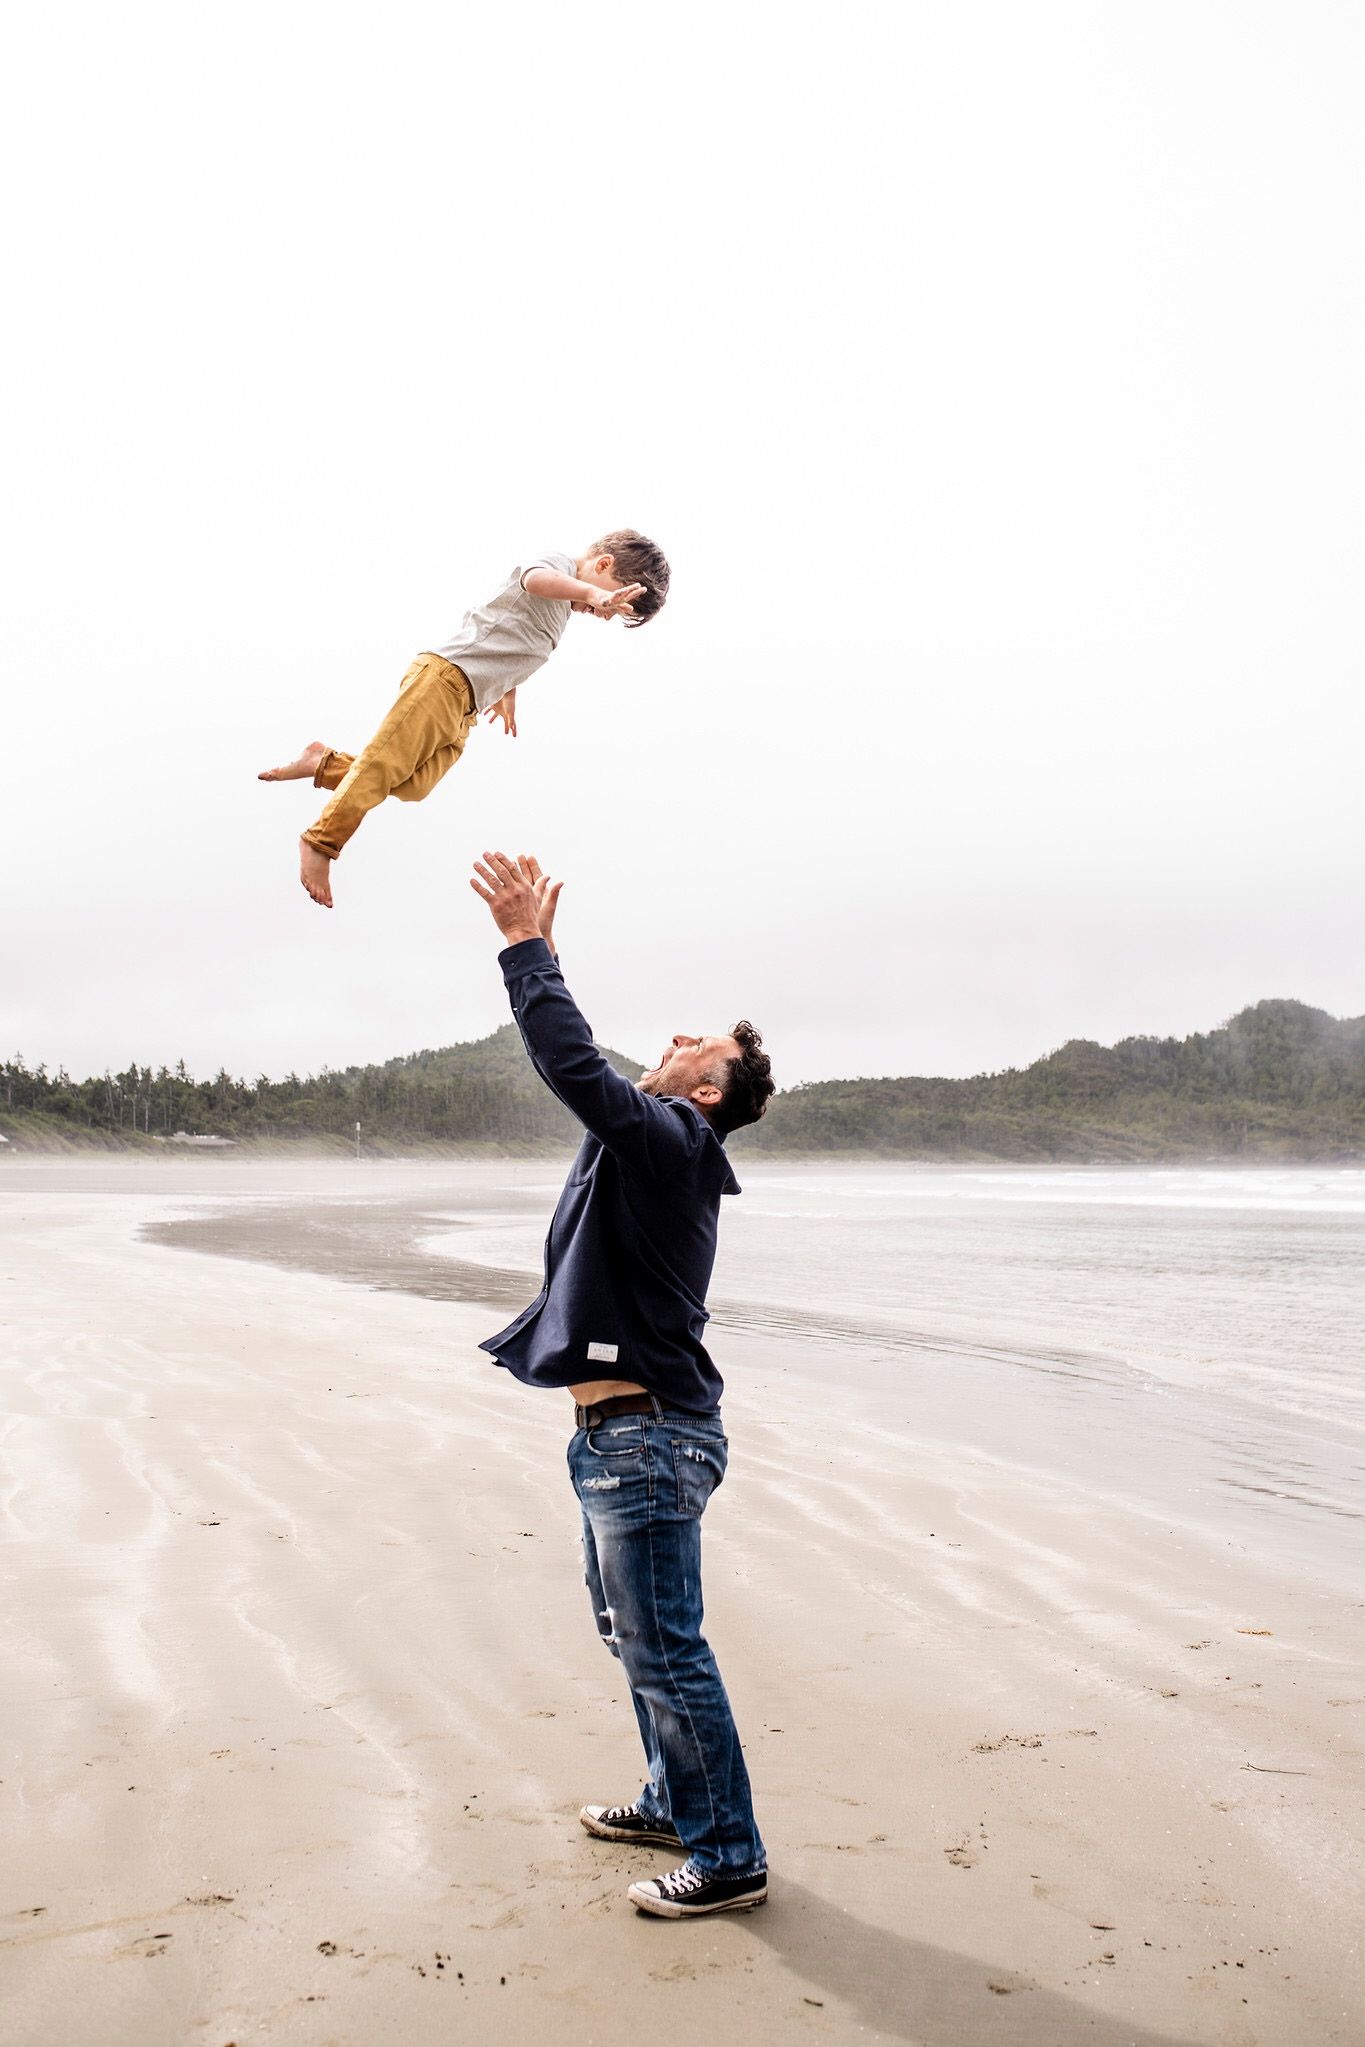 Tofino family vacation: where to stay, eat and play